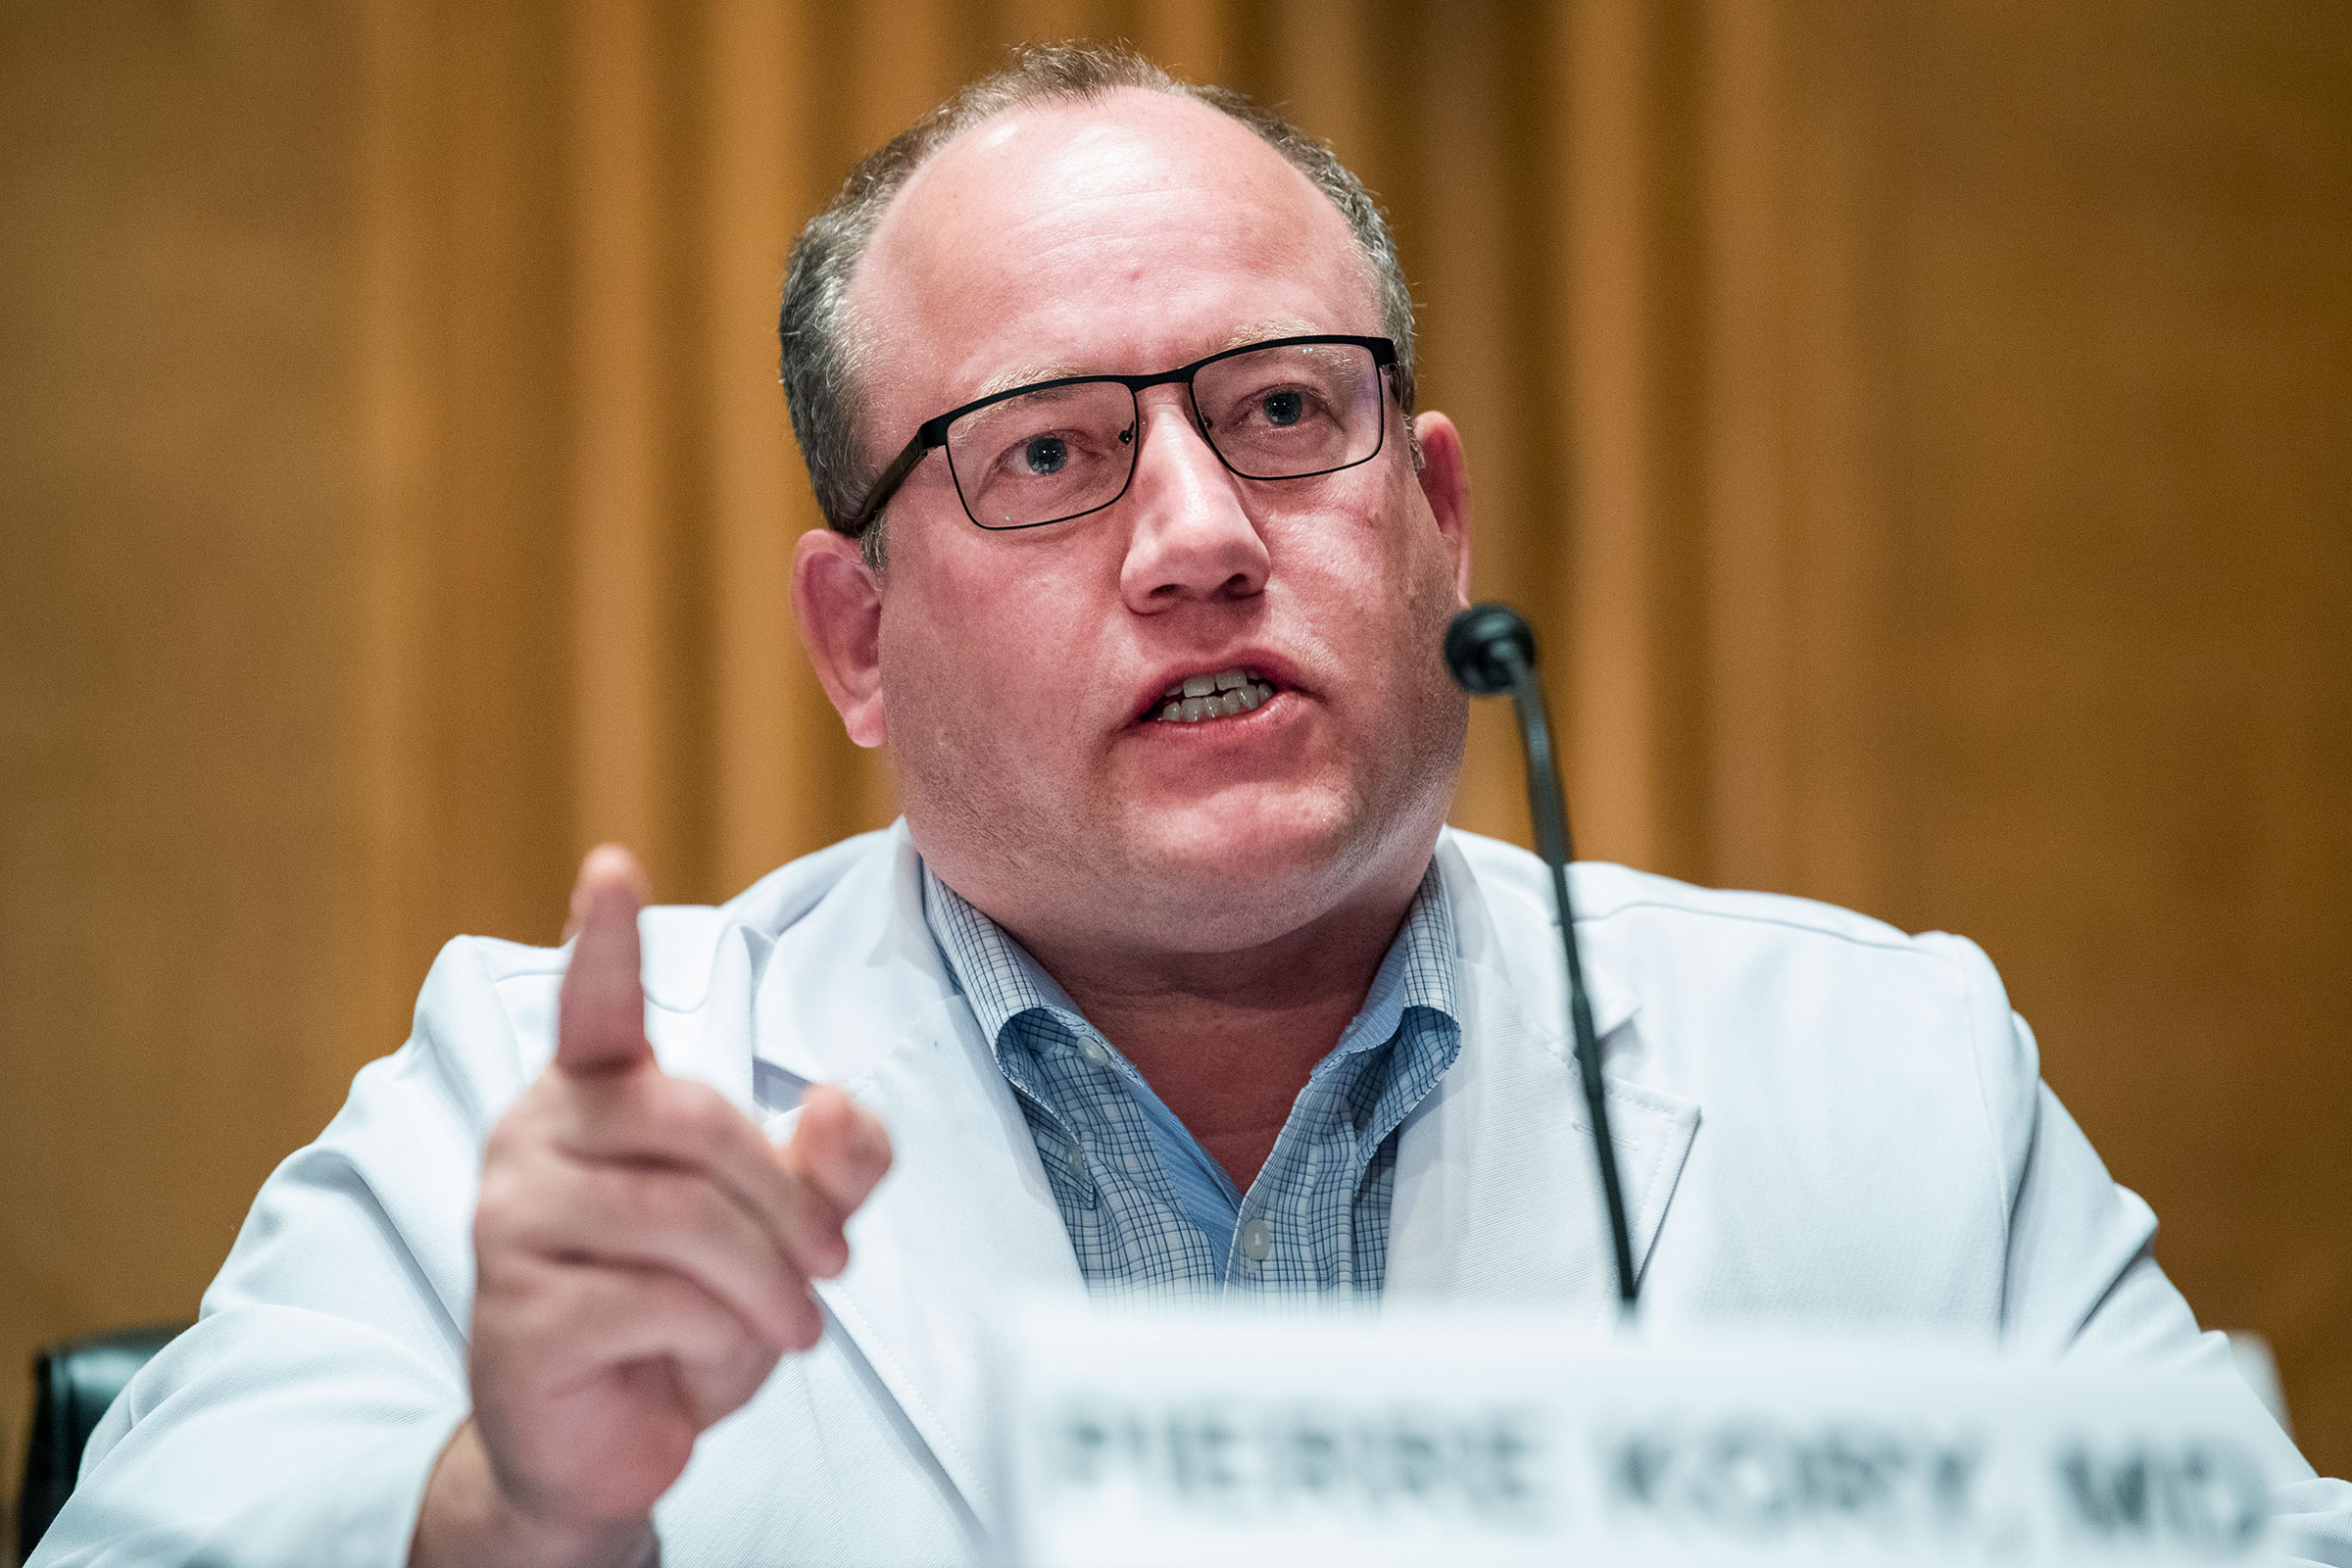 Dr. Pierre Kory testifies during the Senate Homeland Security and Governmental Affairs Committee hearing titled Early Outpatient Treatment: An Essential Part of a COVID-19 Solution, Part II, in Dirksen Building on Dec. 8, 2020.